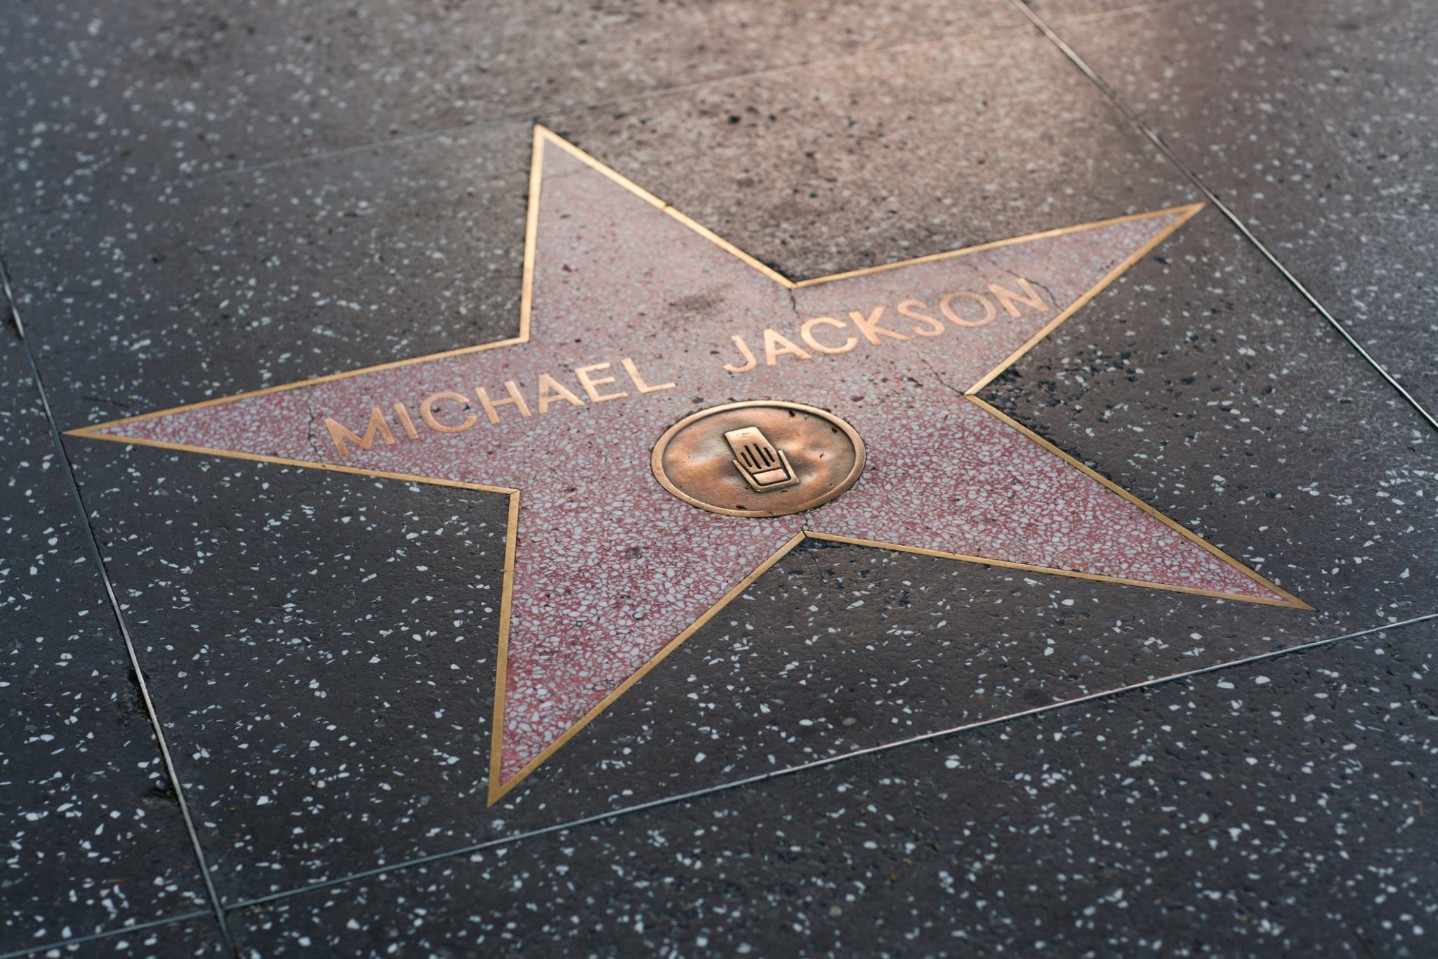 Michael Jackson star on the Hollywood Walk of Fame